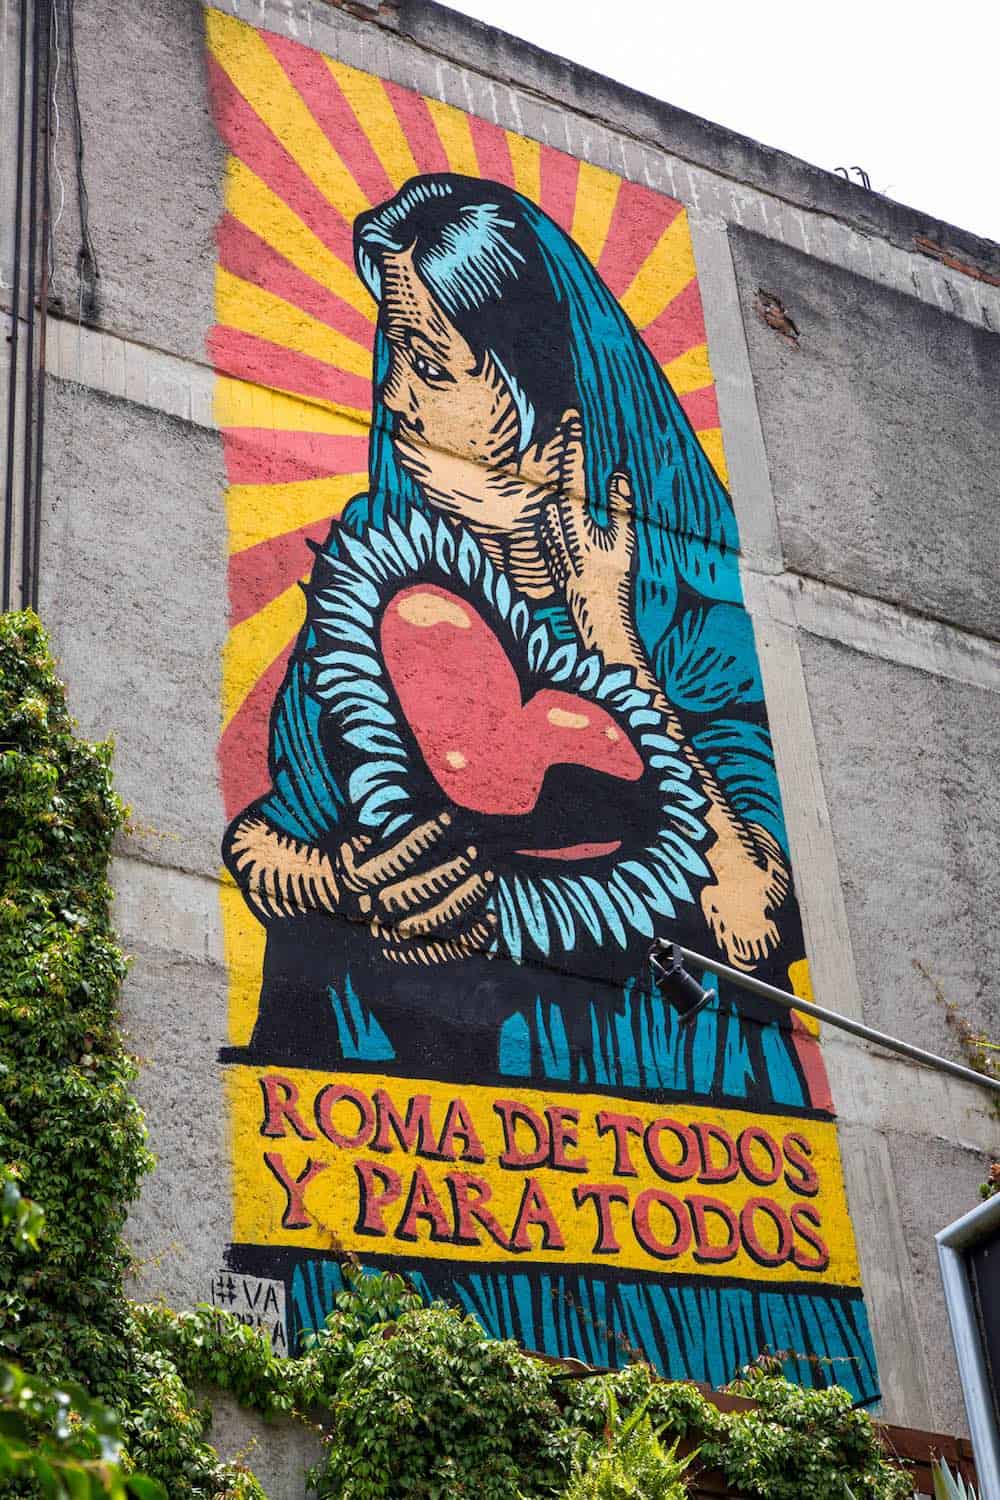 Street mural in Roma neighbourhood of Mexico City.